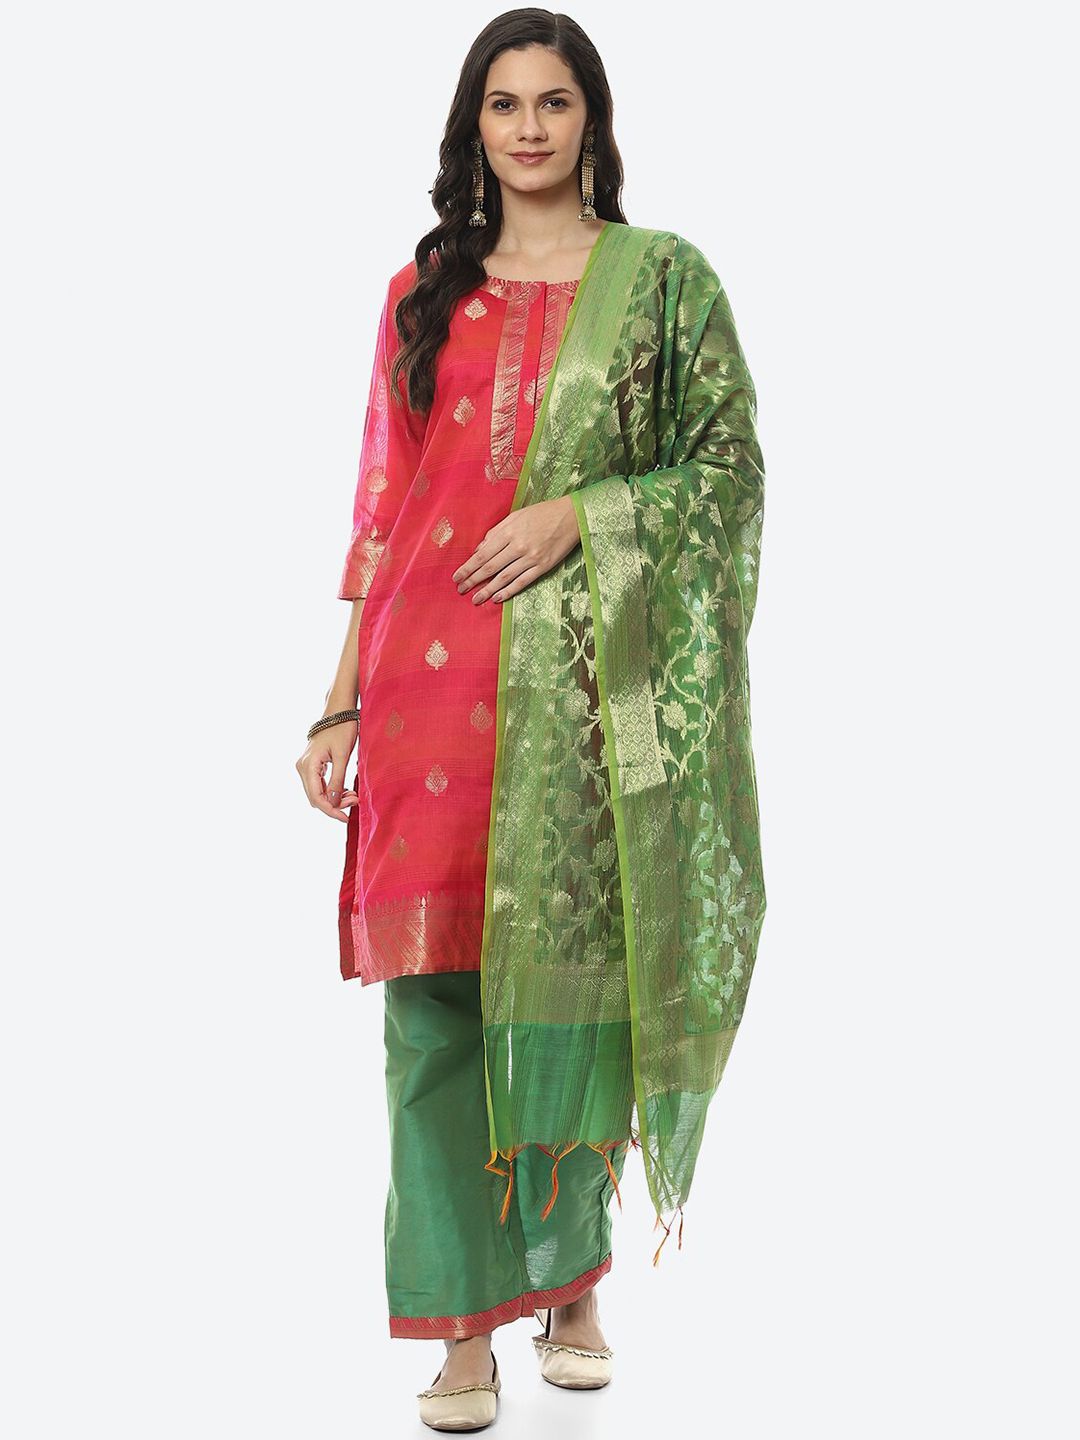 Biba Pink & Green Printed Unstitched Dress Material Price in India